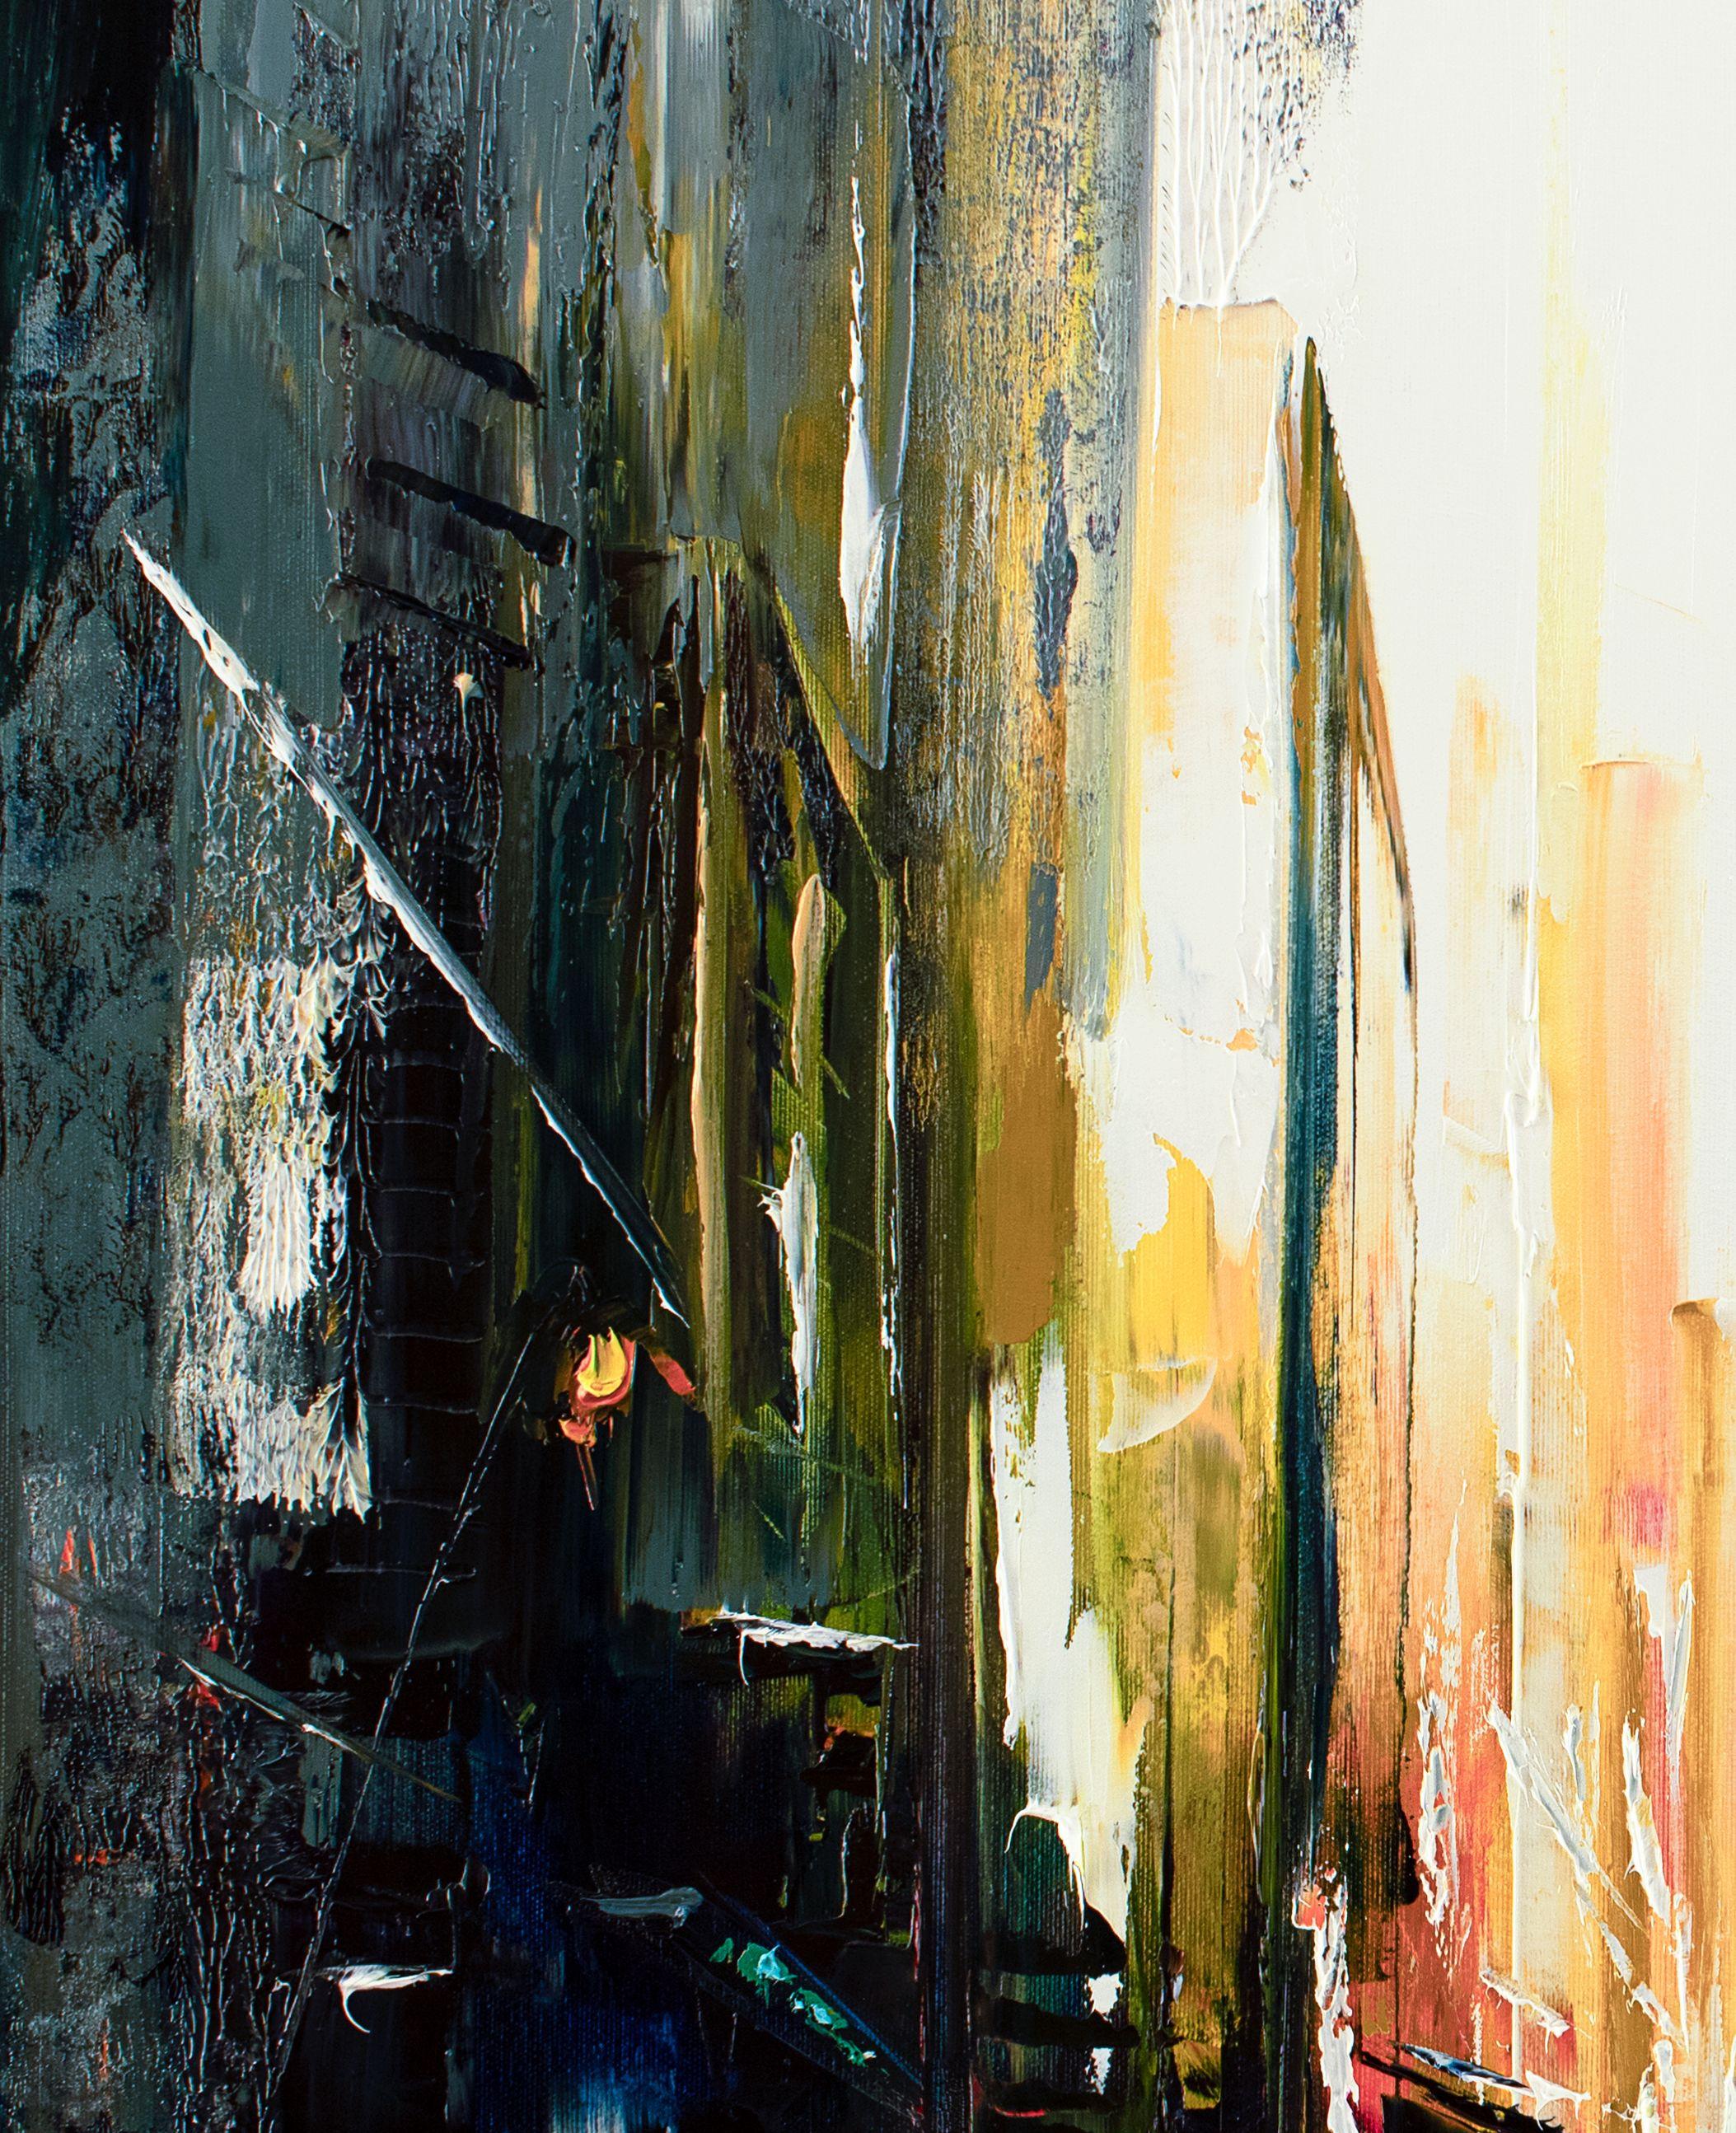 Energy of the City, Painting, Oil on Canvas - Black Abstract Painting by Bozhena Fuchs